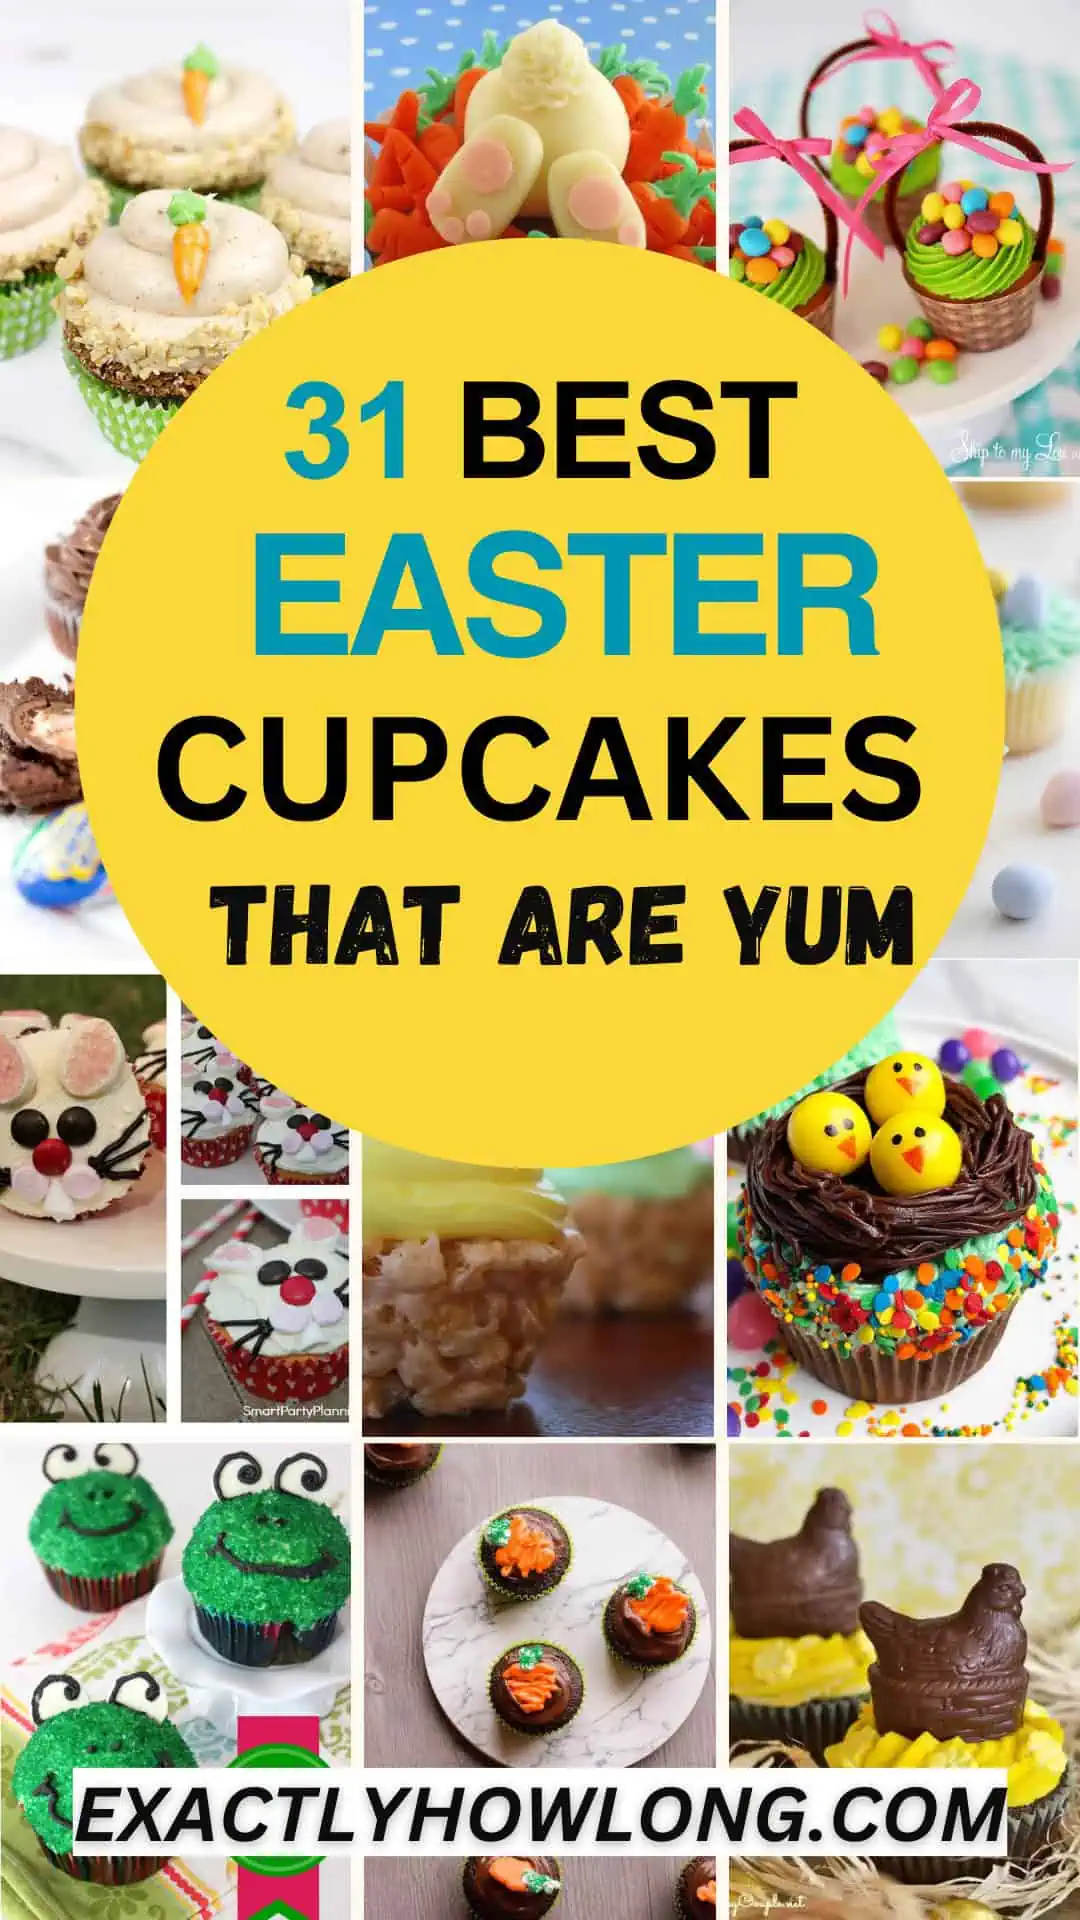 31 Best Easter Cupcakes